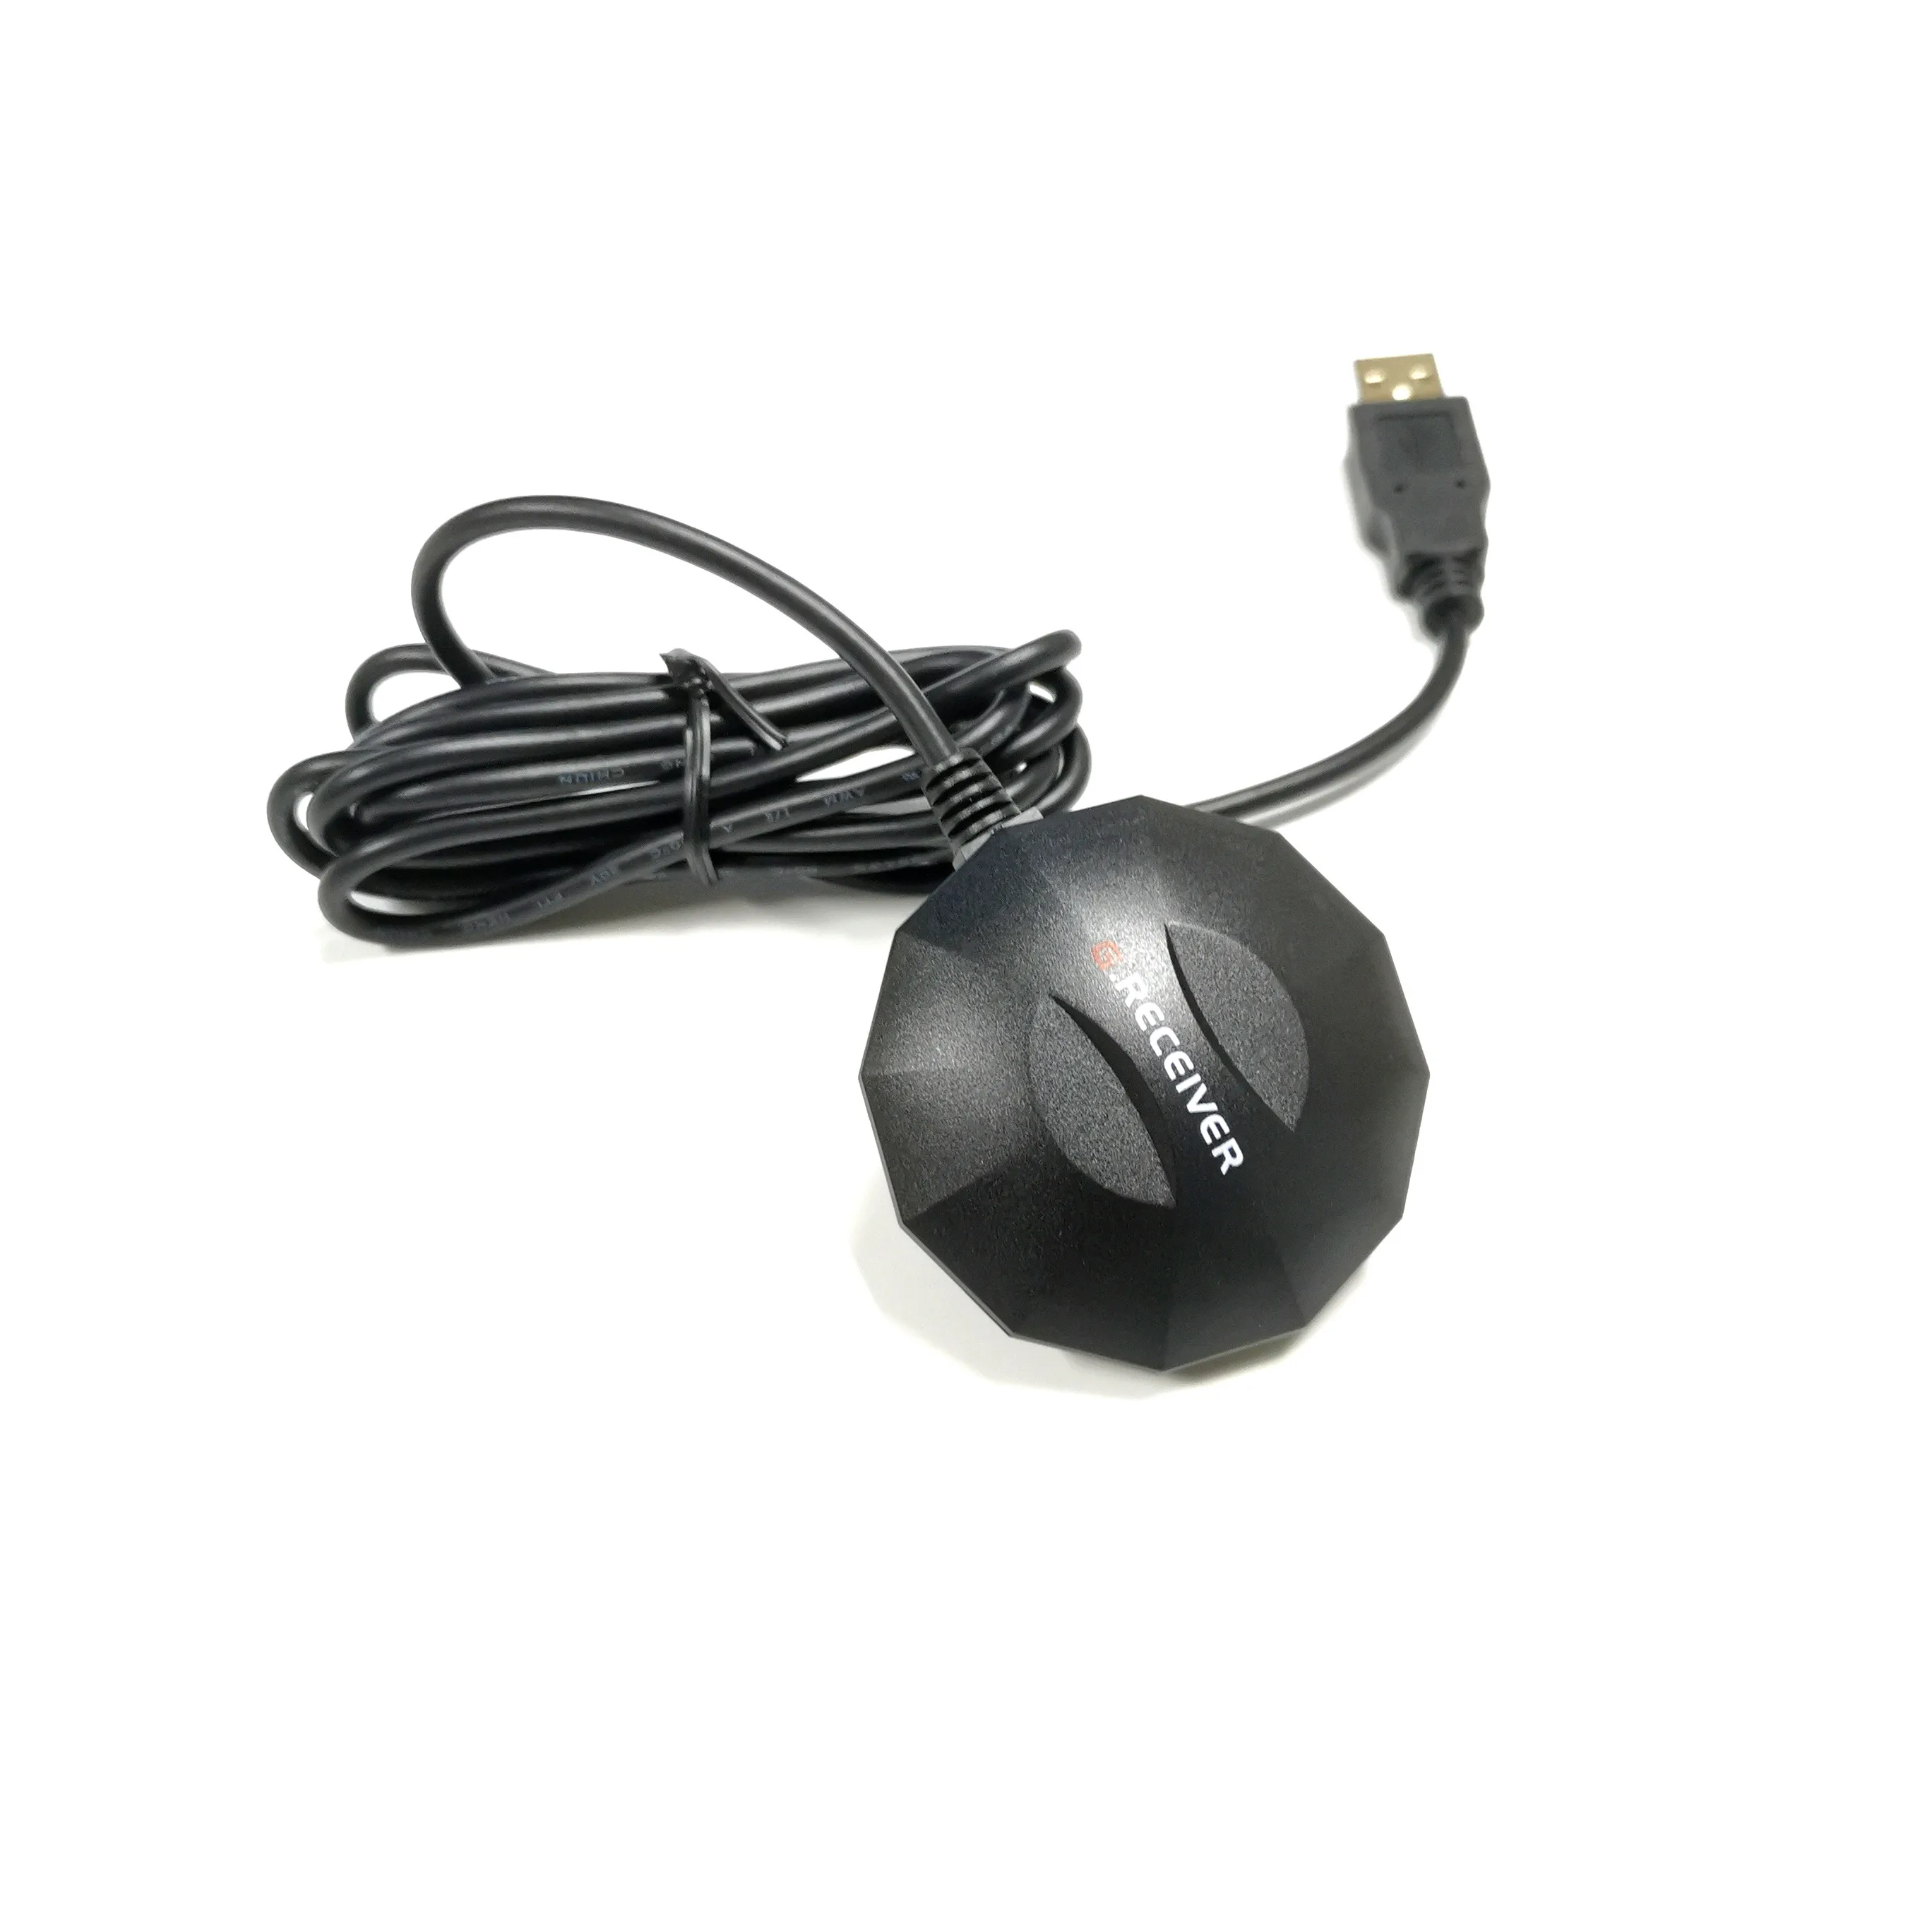 Wholesale usb gps receiver usb module GNSS100 industrial application replacement BU353S4 TOPGNSS From m.alibaba.com